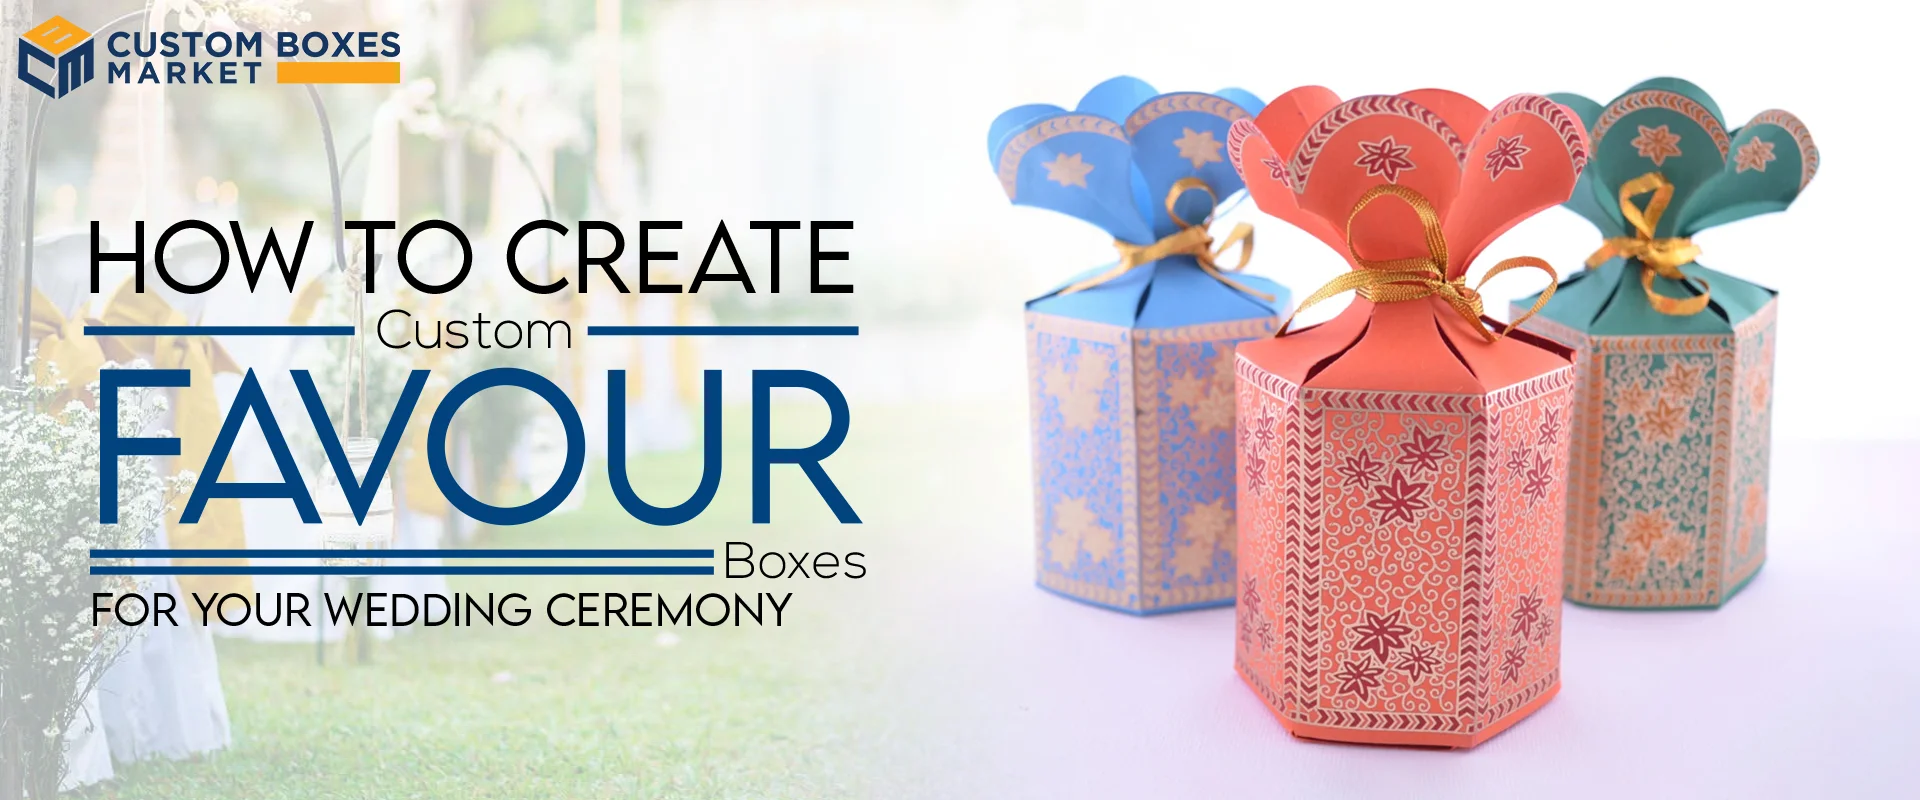 How to Create Custom Favour Boxes For Your Wedding Ceremony